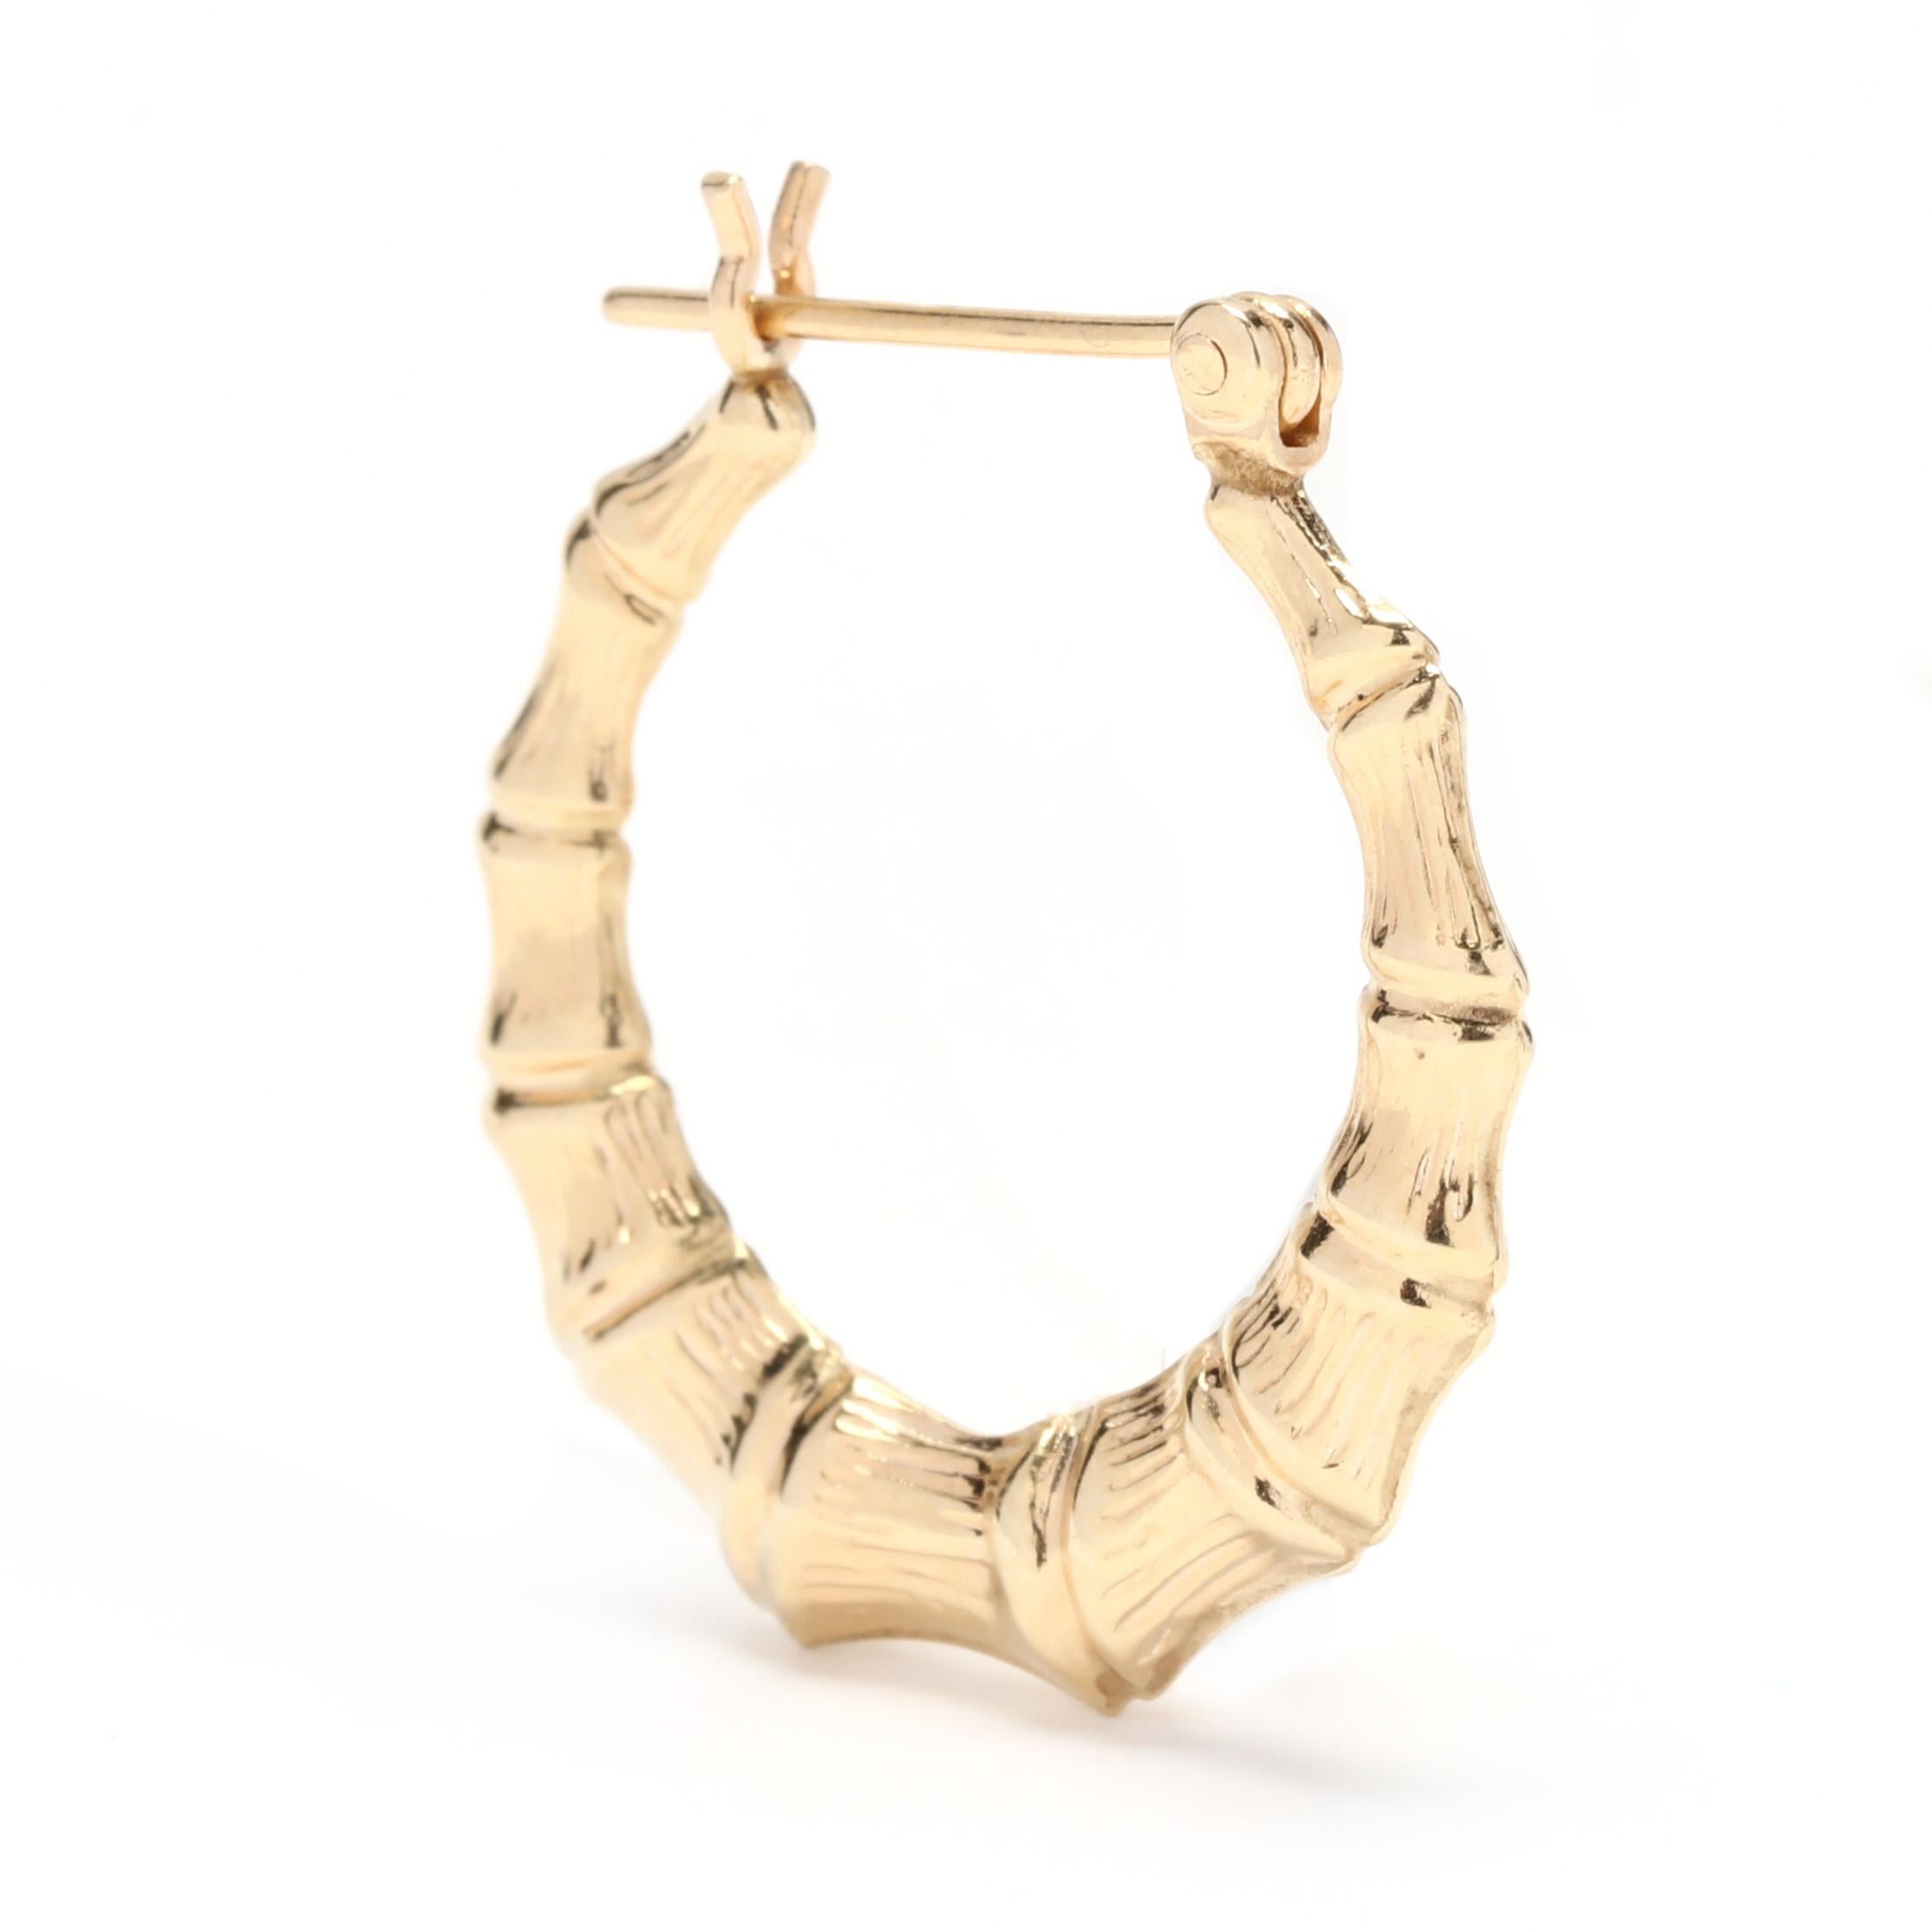 A pair of vintage 14 karat yellow gold medium bamboo hoop earrings. These simple hoops feature a tapered bamboo motif with pierced latch backs.

Length :7/8 in.

Tube Width: 3.2 mm

Weight: 1.4 dwts. / 2.18 grams

Stamps: CD 14K

Ring Sizings &